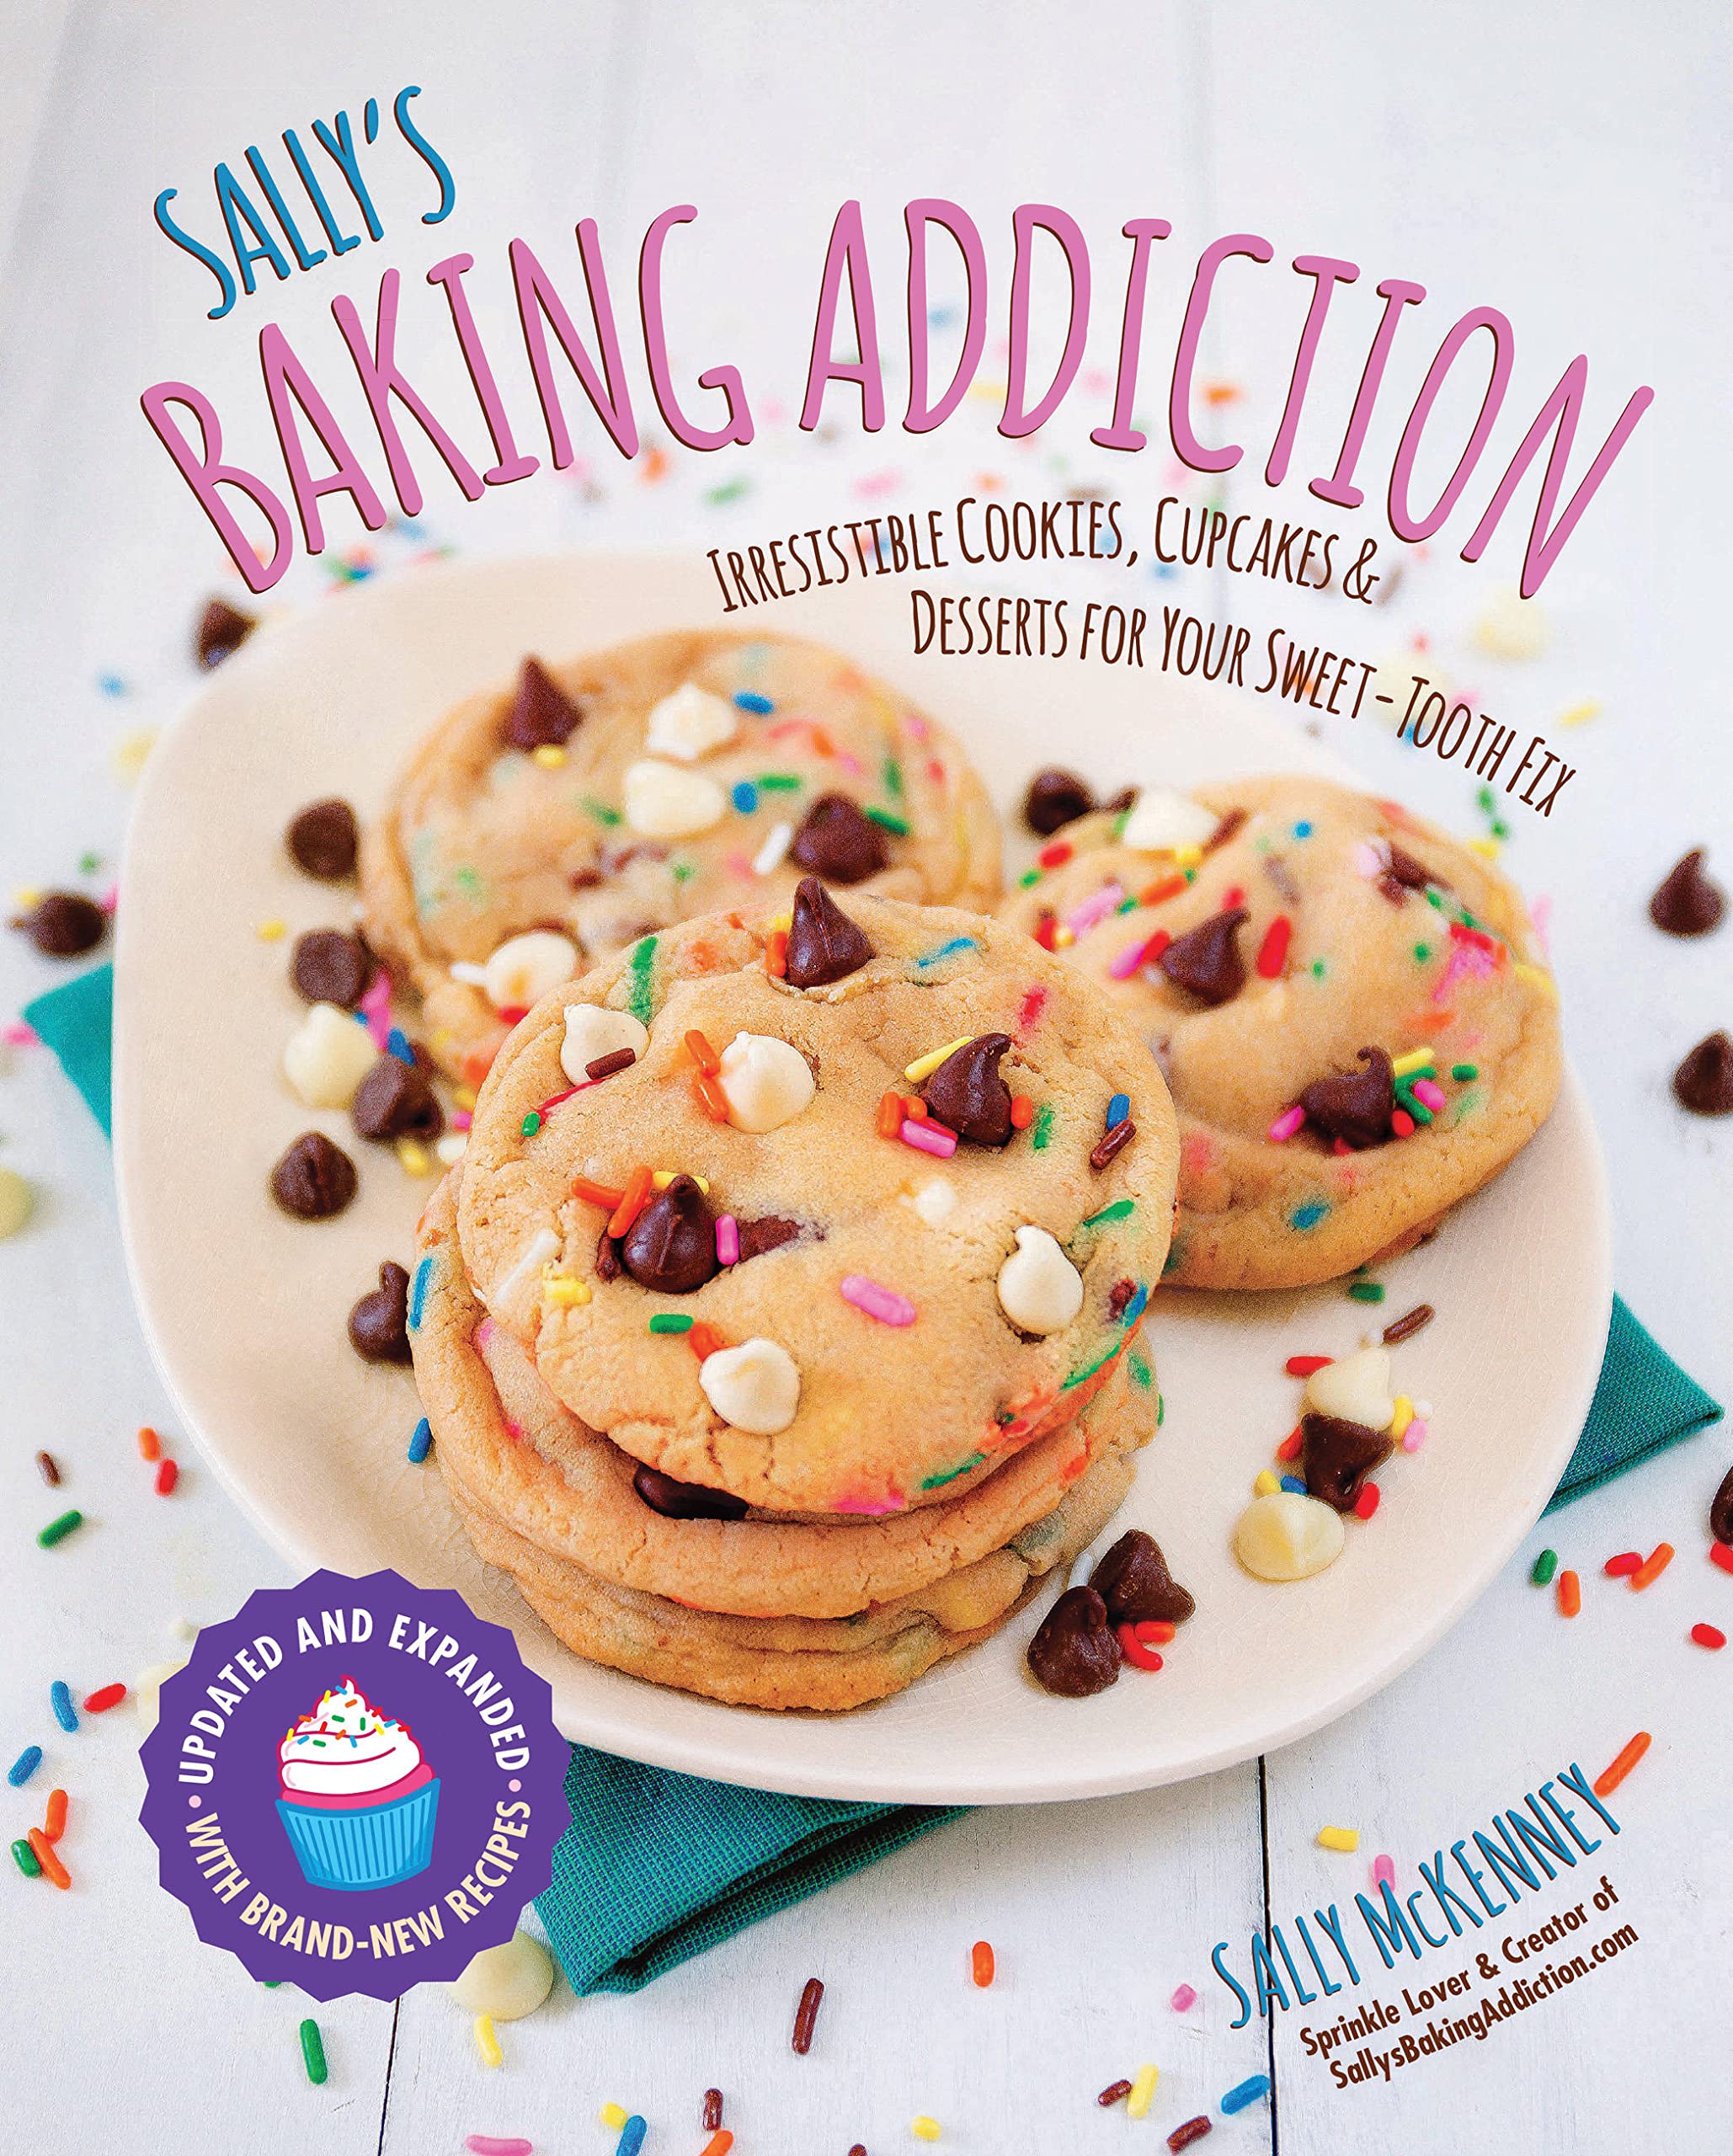 Sally's Baking Addiction: Irresistible Cookies, Cupcakes, and Desserts for Your Sweet-Tooth Fix (Volume 1) (Sally's Baking Addiction, 1)